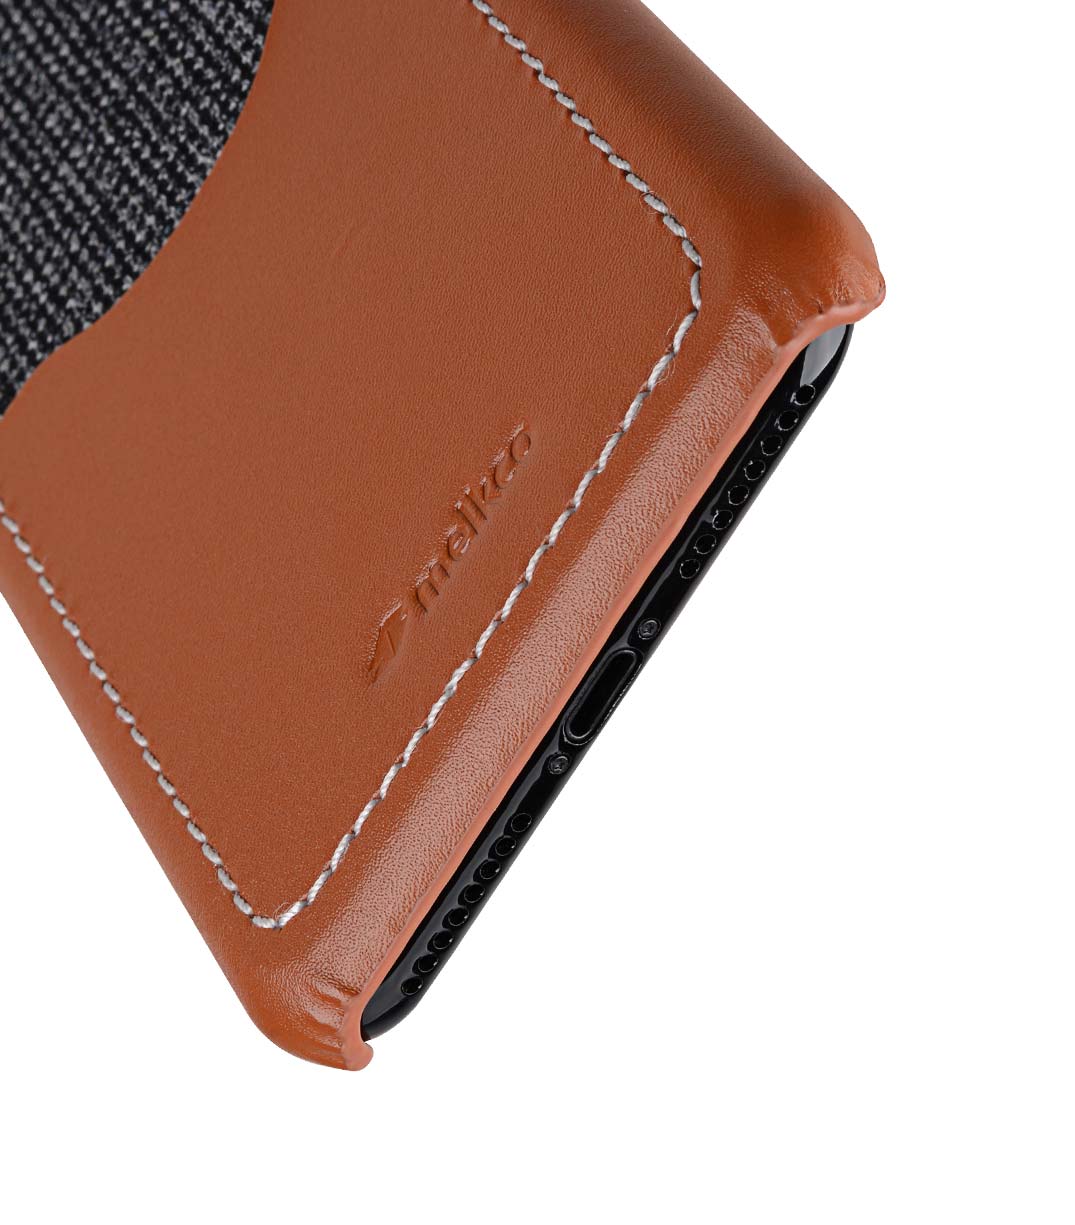 Melkco Holmes Series Fine Grid Genuine Leather Snap Cover with Card slot Case for Apple iPhone 7 / 8 Plus (5.5") - (Brown)